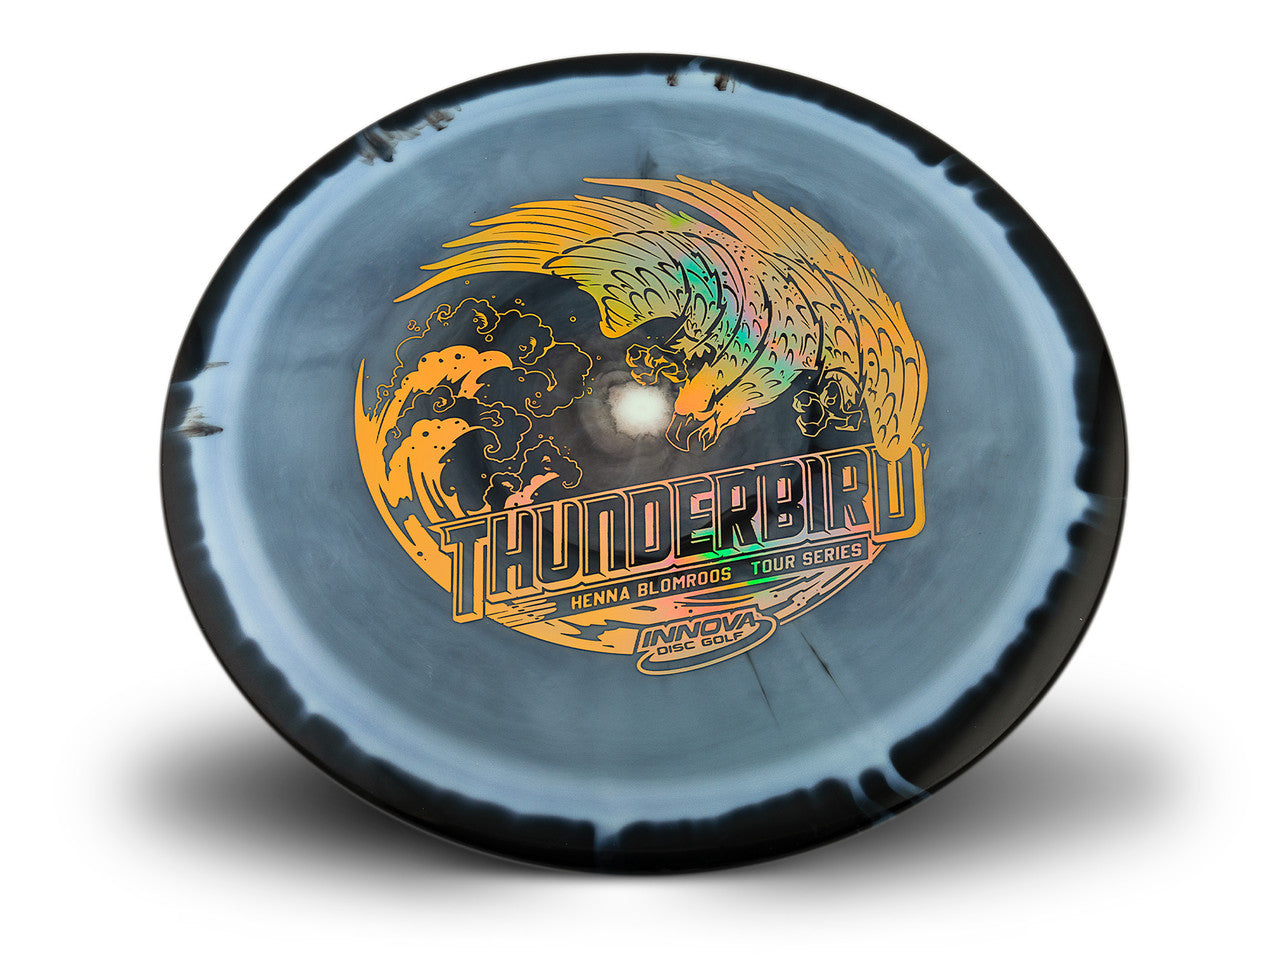 Innova Halo Star Thunderbird Distance Driver with Henna Blomroos Tour Series 2022 Stamp - Speed 9